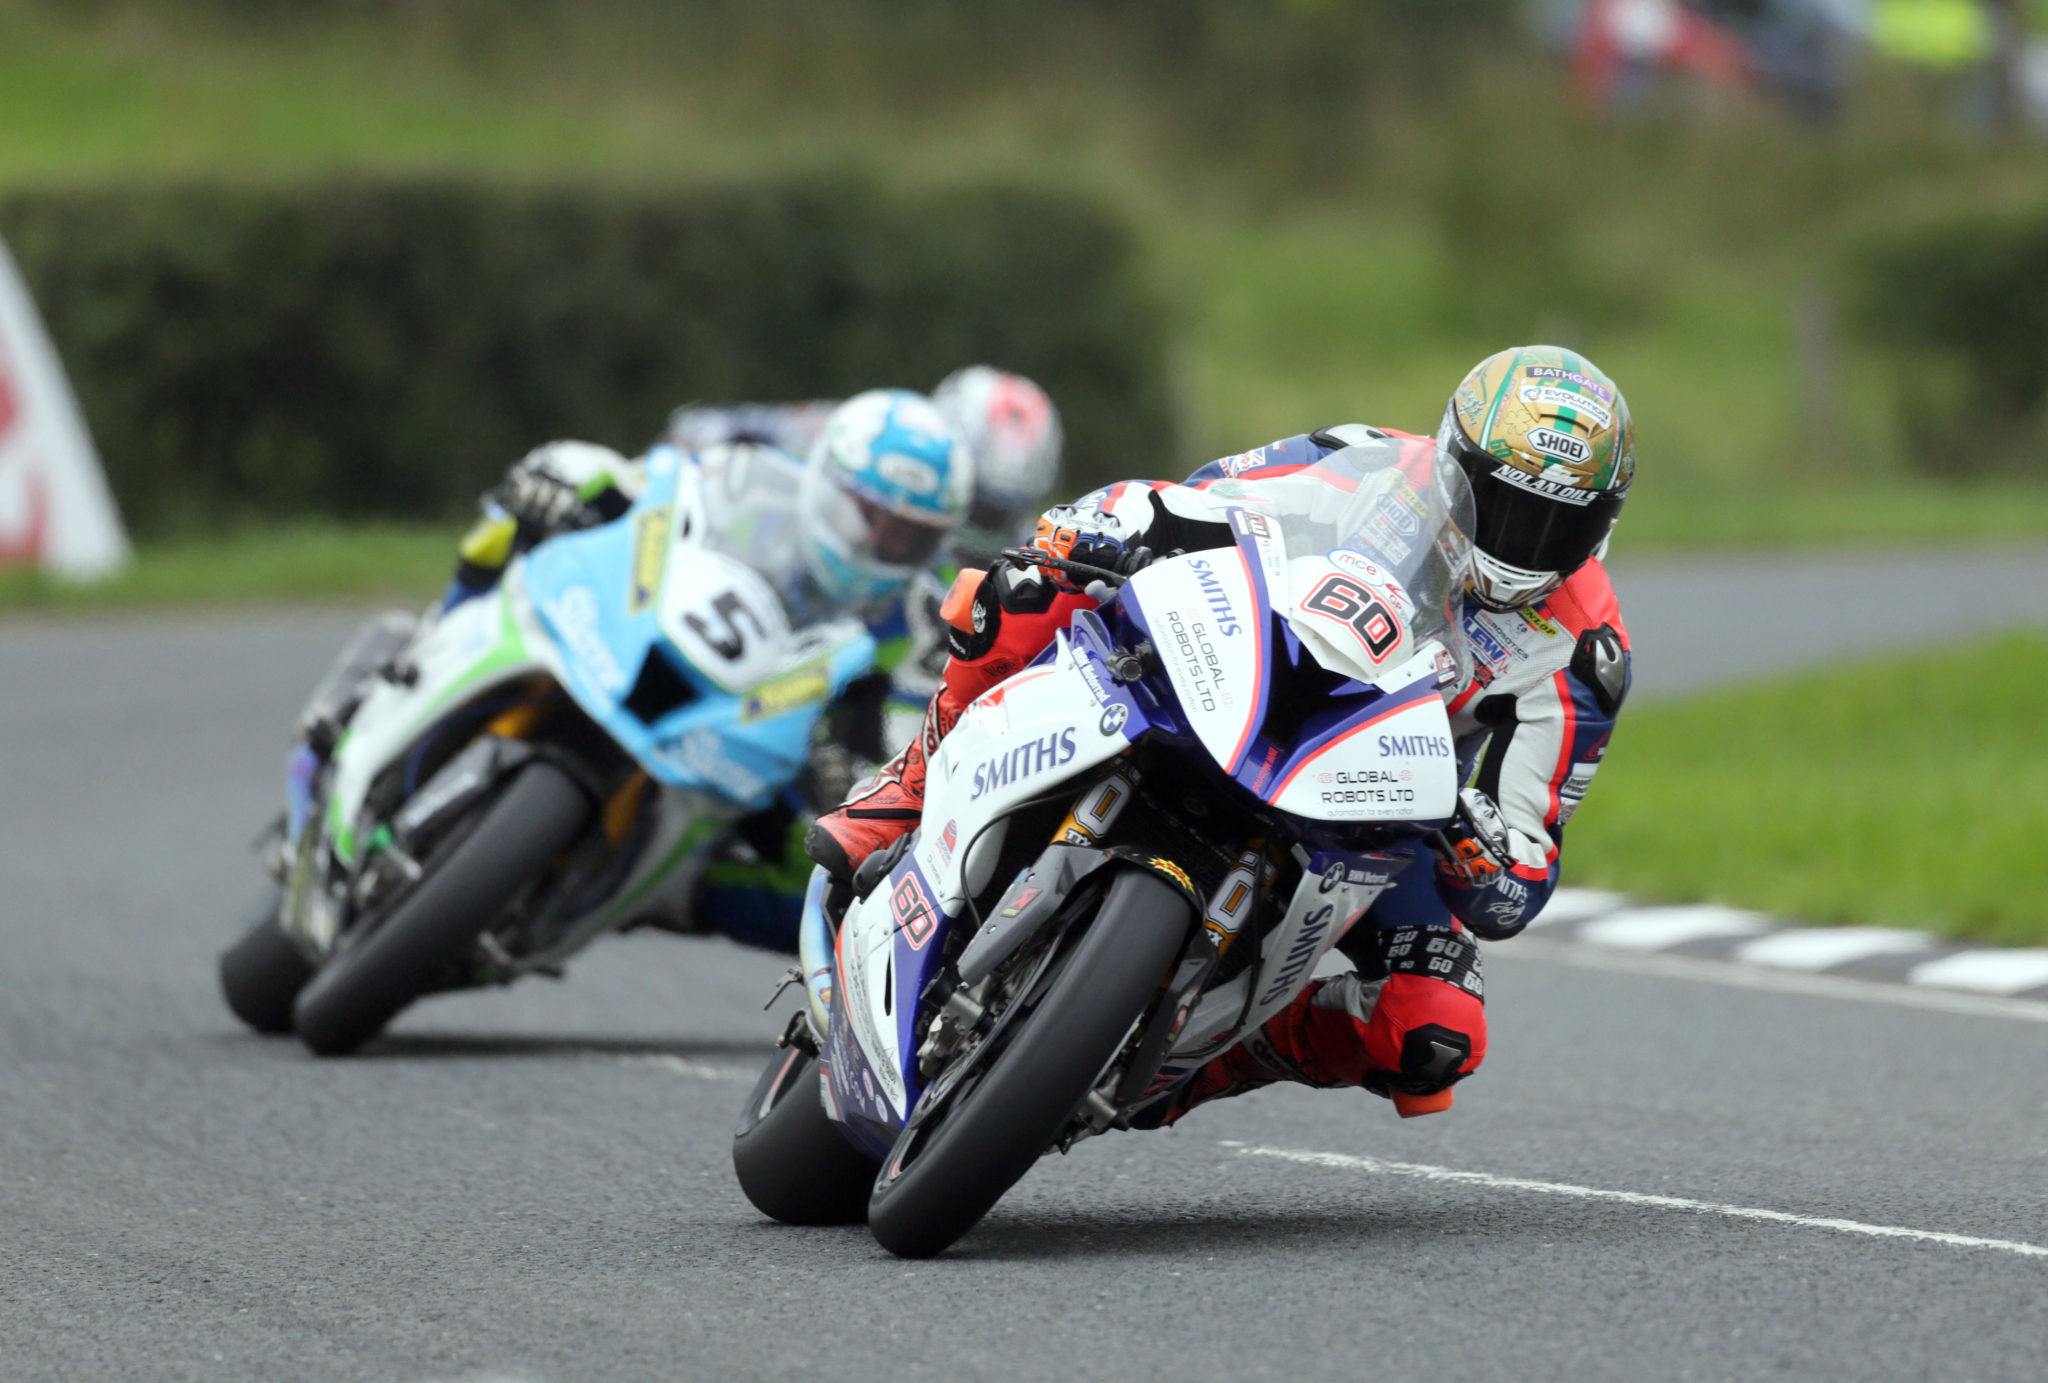 Challenging times at the Ulster Grand Prix | Devitt Insurance